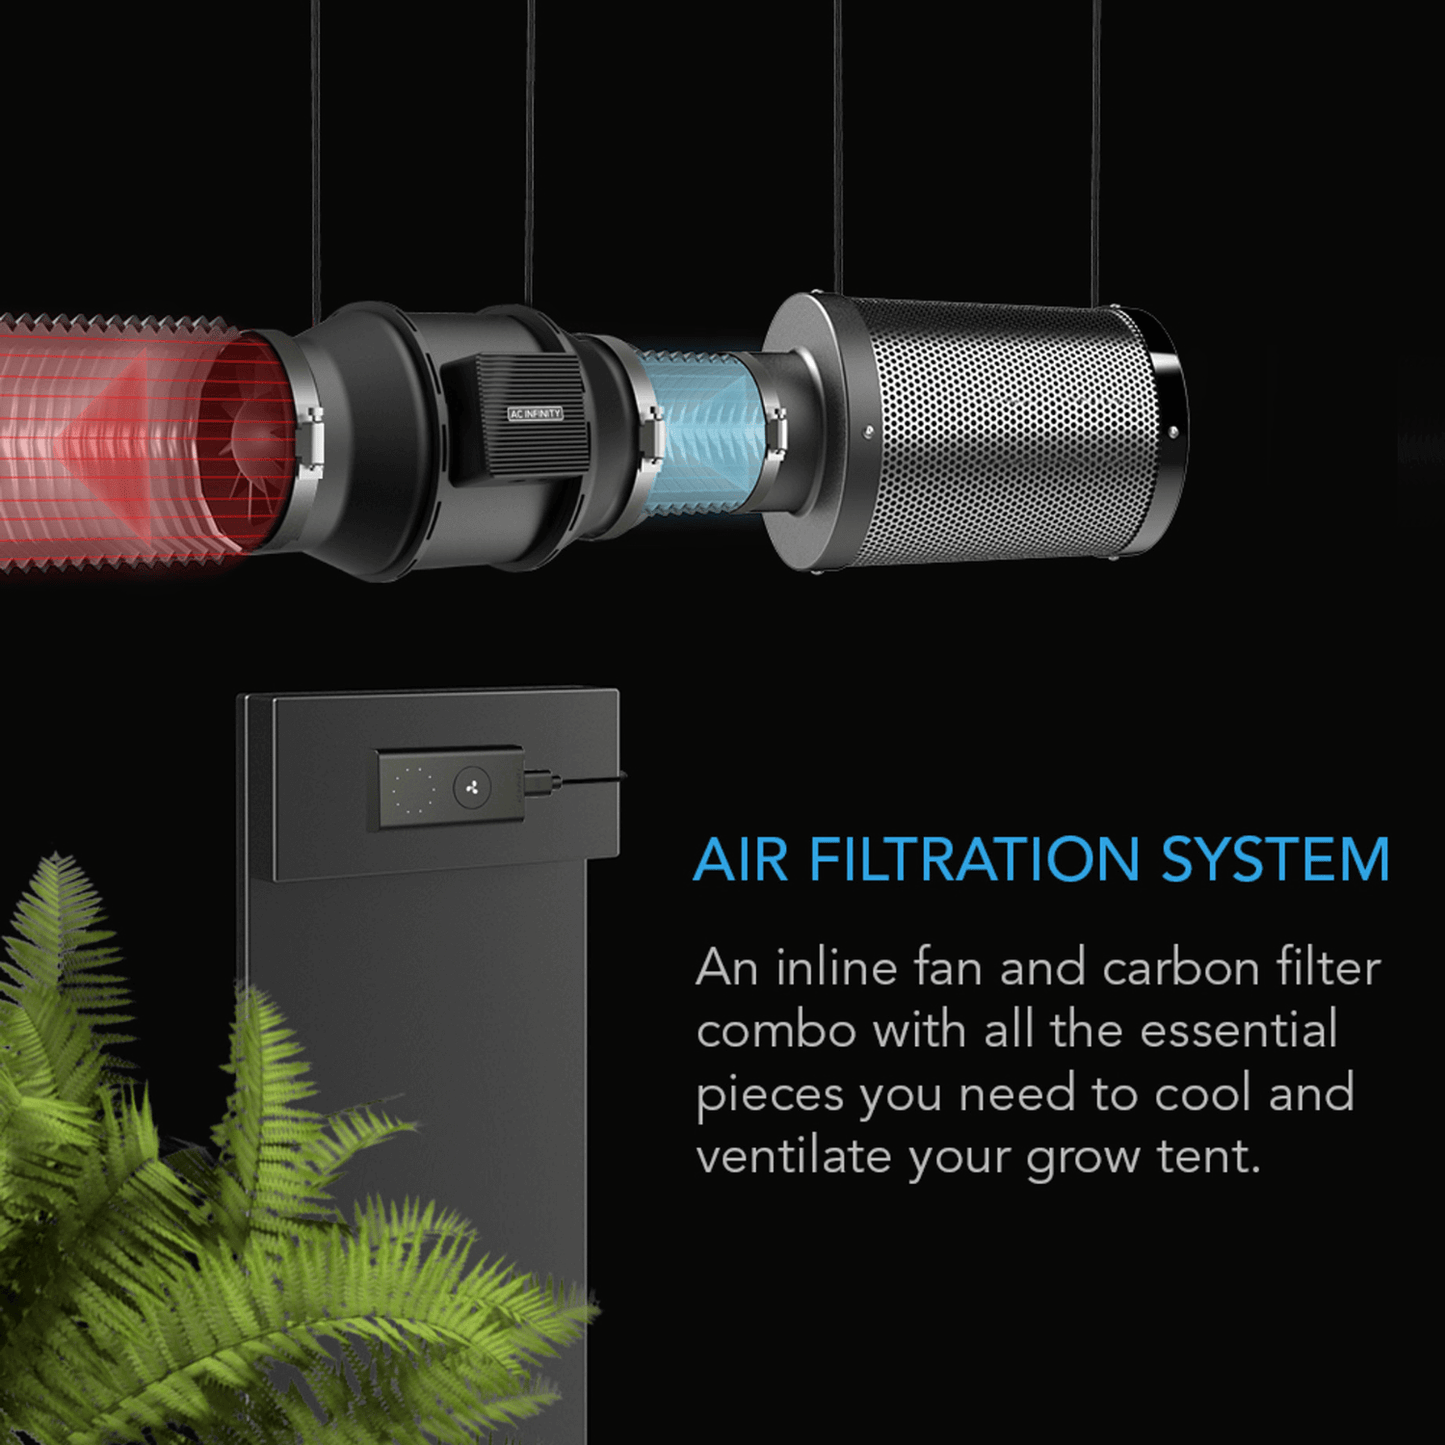 AC Infinity Air Filtration Kit 6", Inline Fan with Speed Controller, Carbon Filter & Ducting Combo AC-FKS6 Ventilation